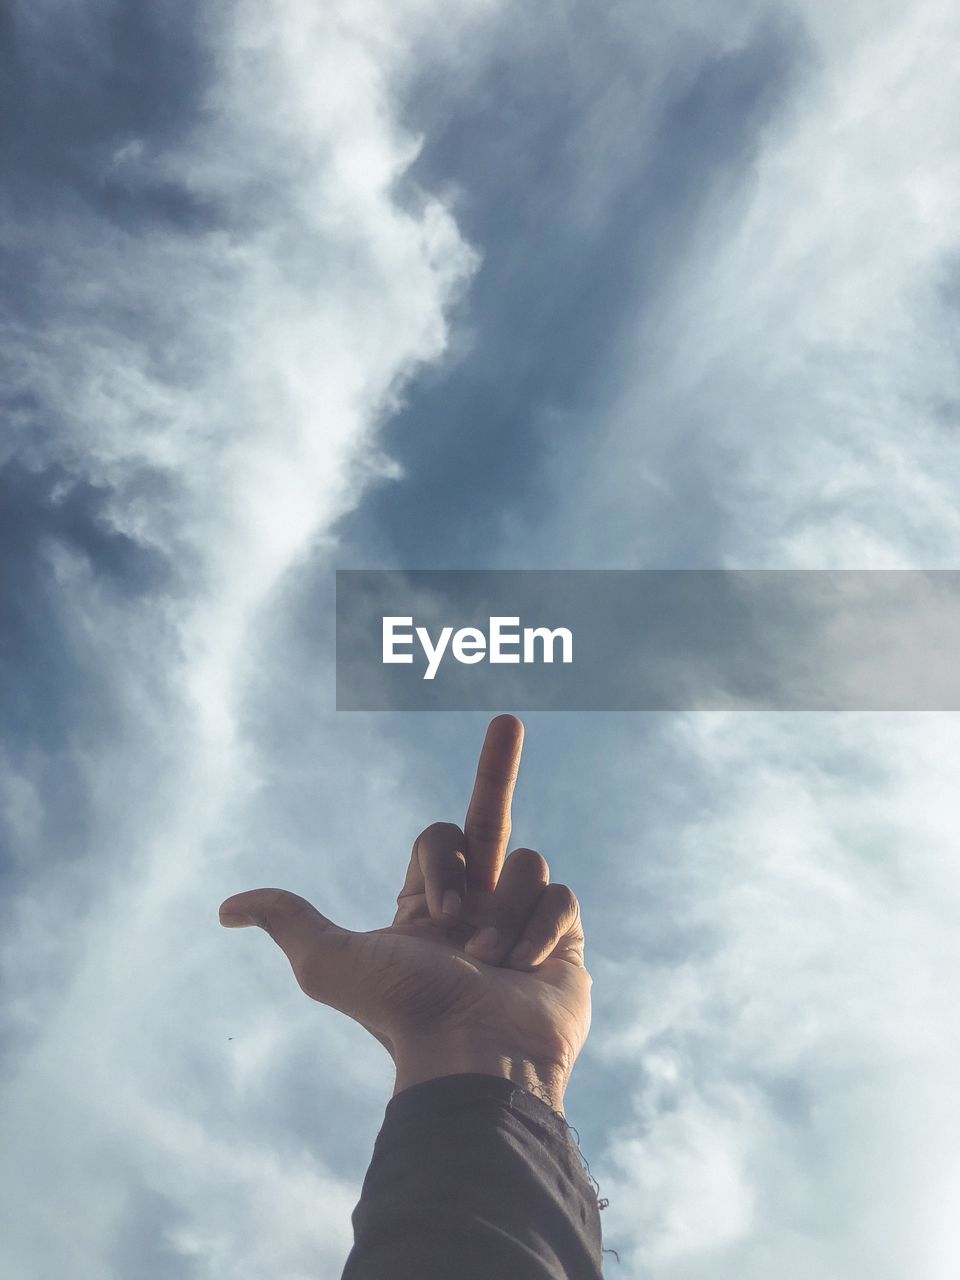 Cropped image of hand showing obscene gesture against cloudy sky